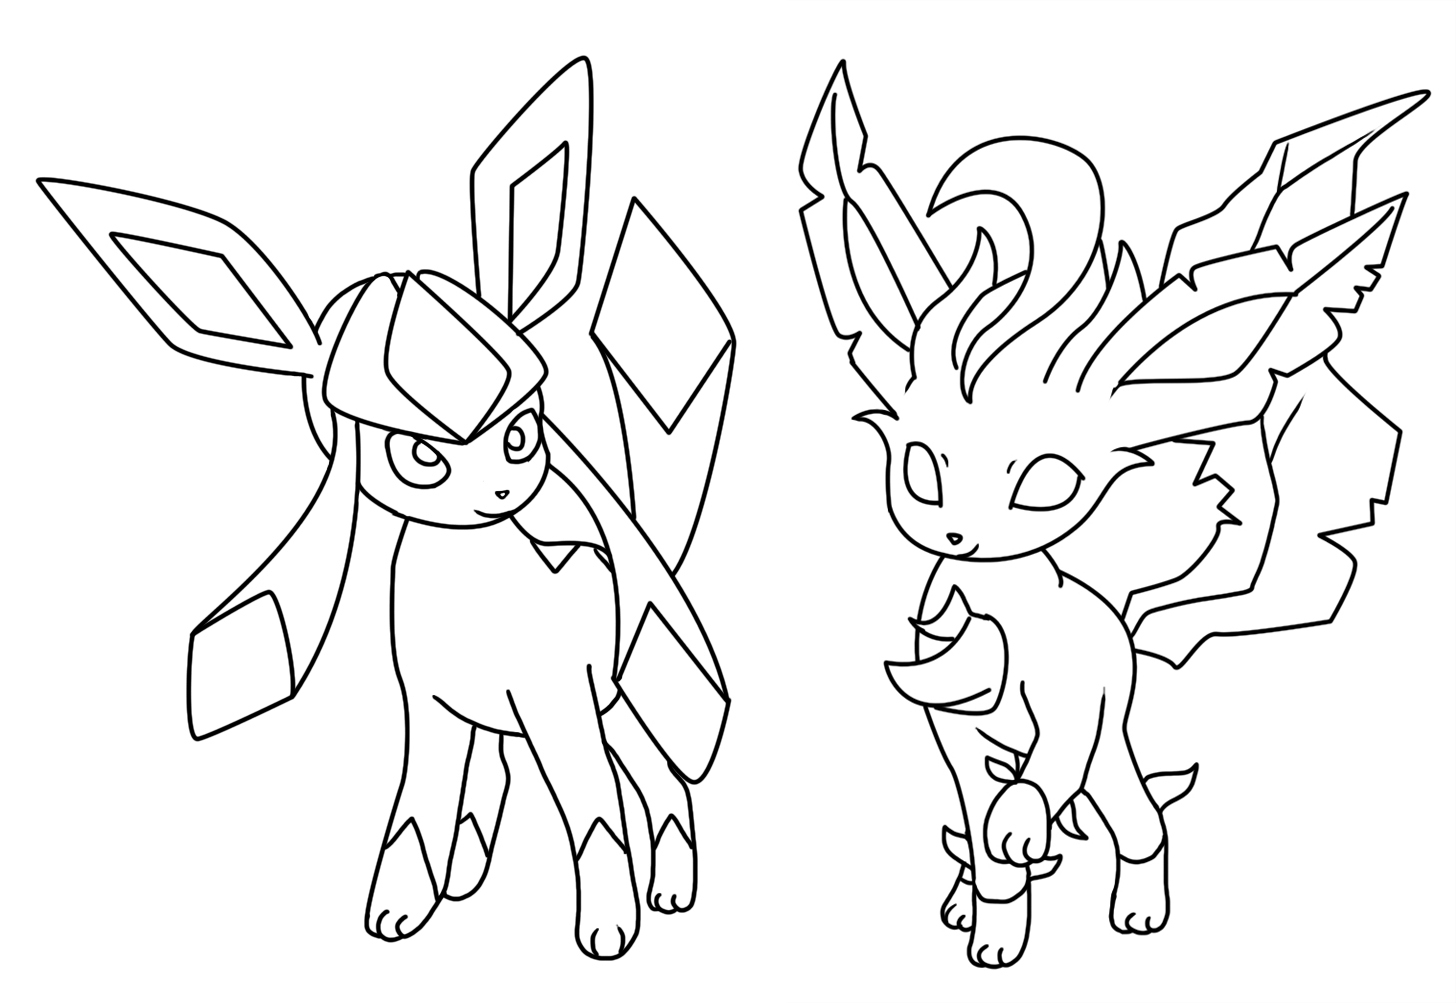 Glaceon and leafeon coloring page by bellatrixie